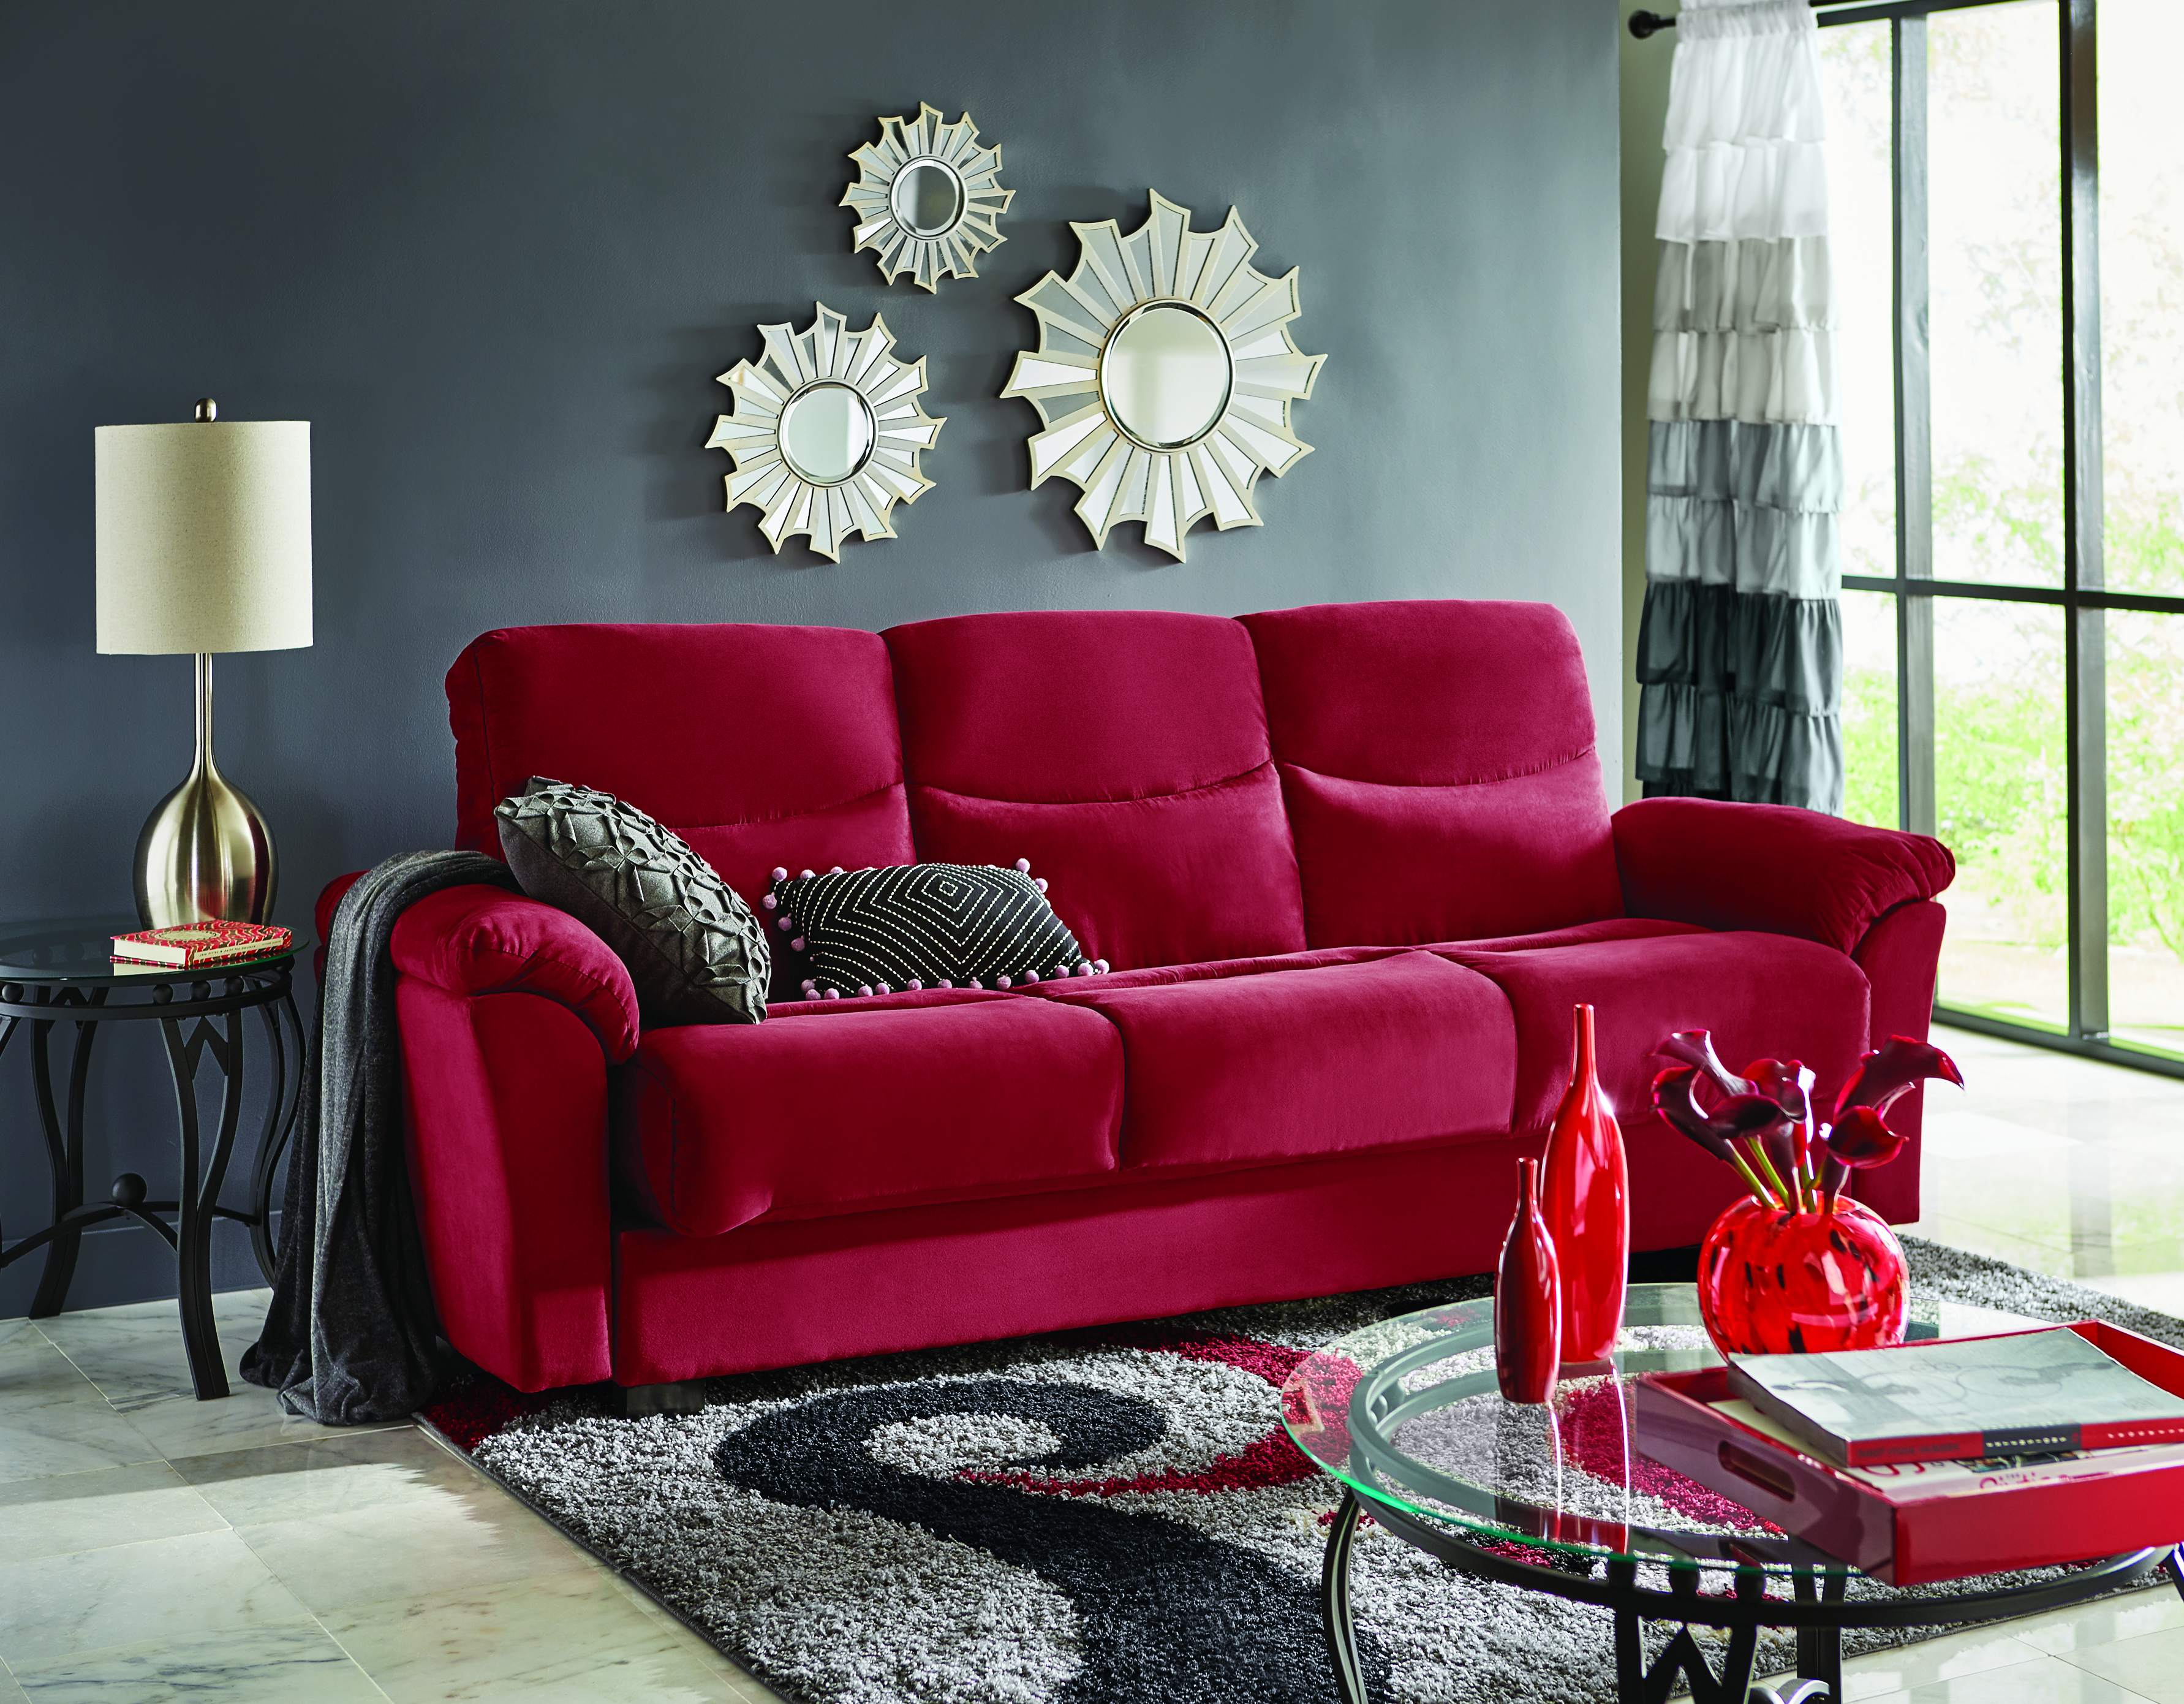 Red sofa with gray pillows and throw, three sunburst wall mirrors, a gray, black and red swirl rug, and glass topped tables.